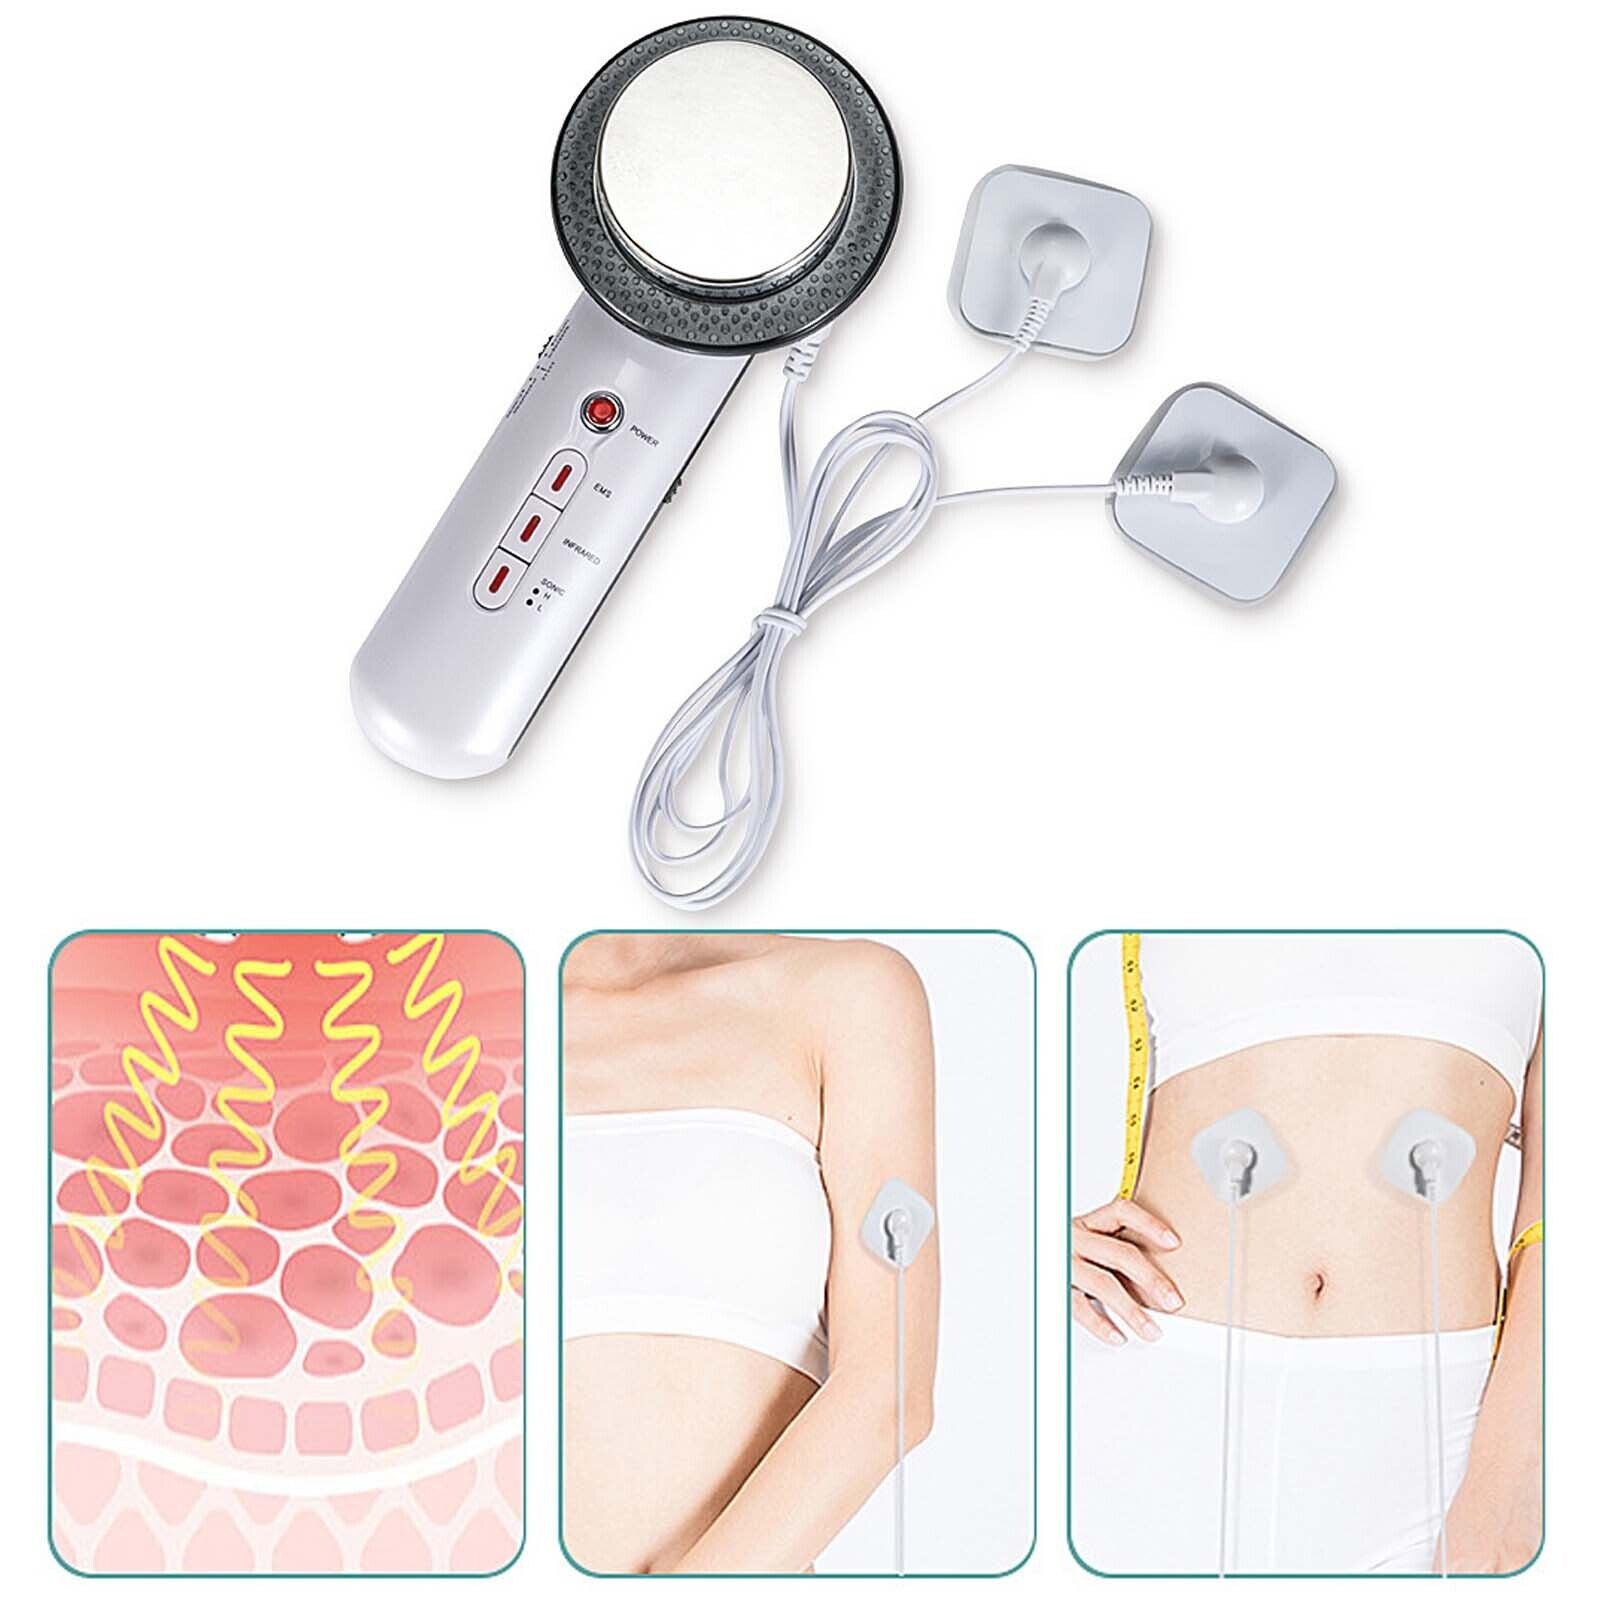 CelluLift- Anti-Cellulite Slimming Device